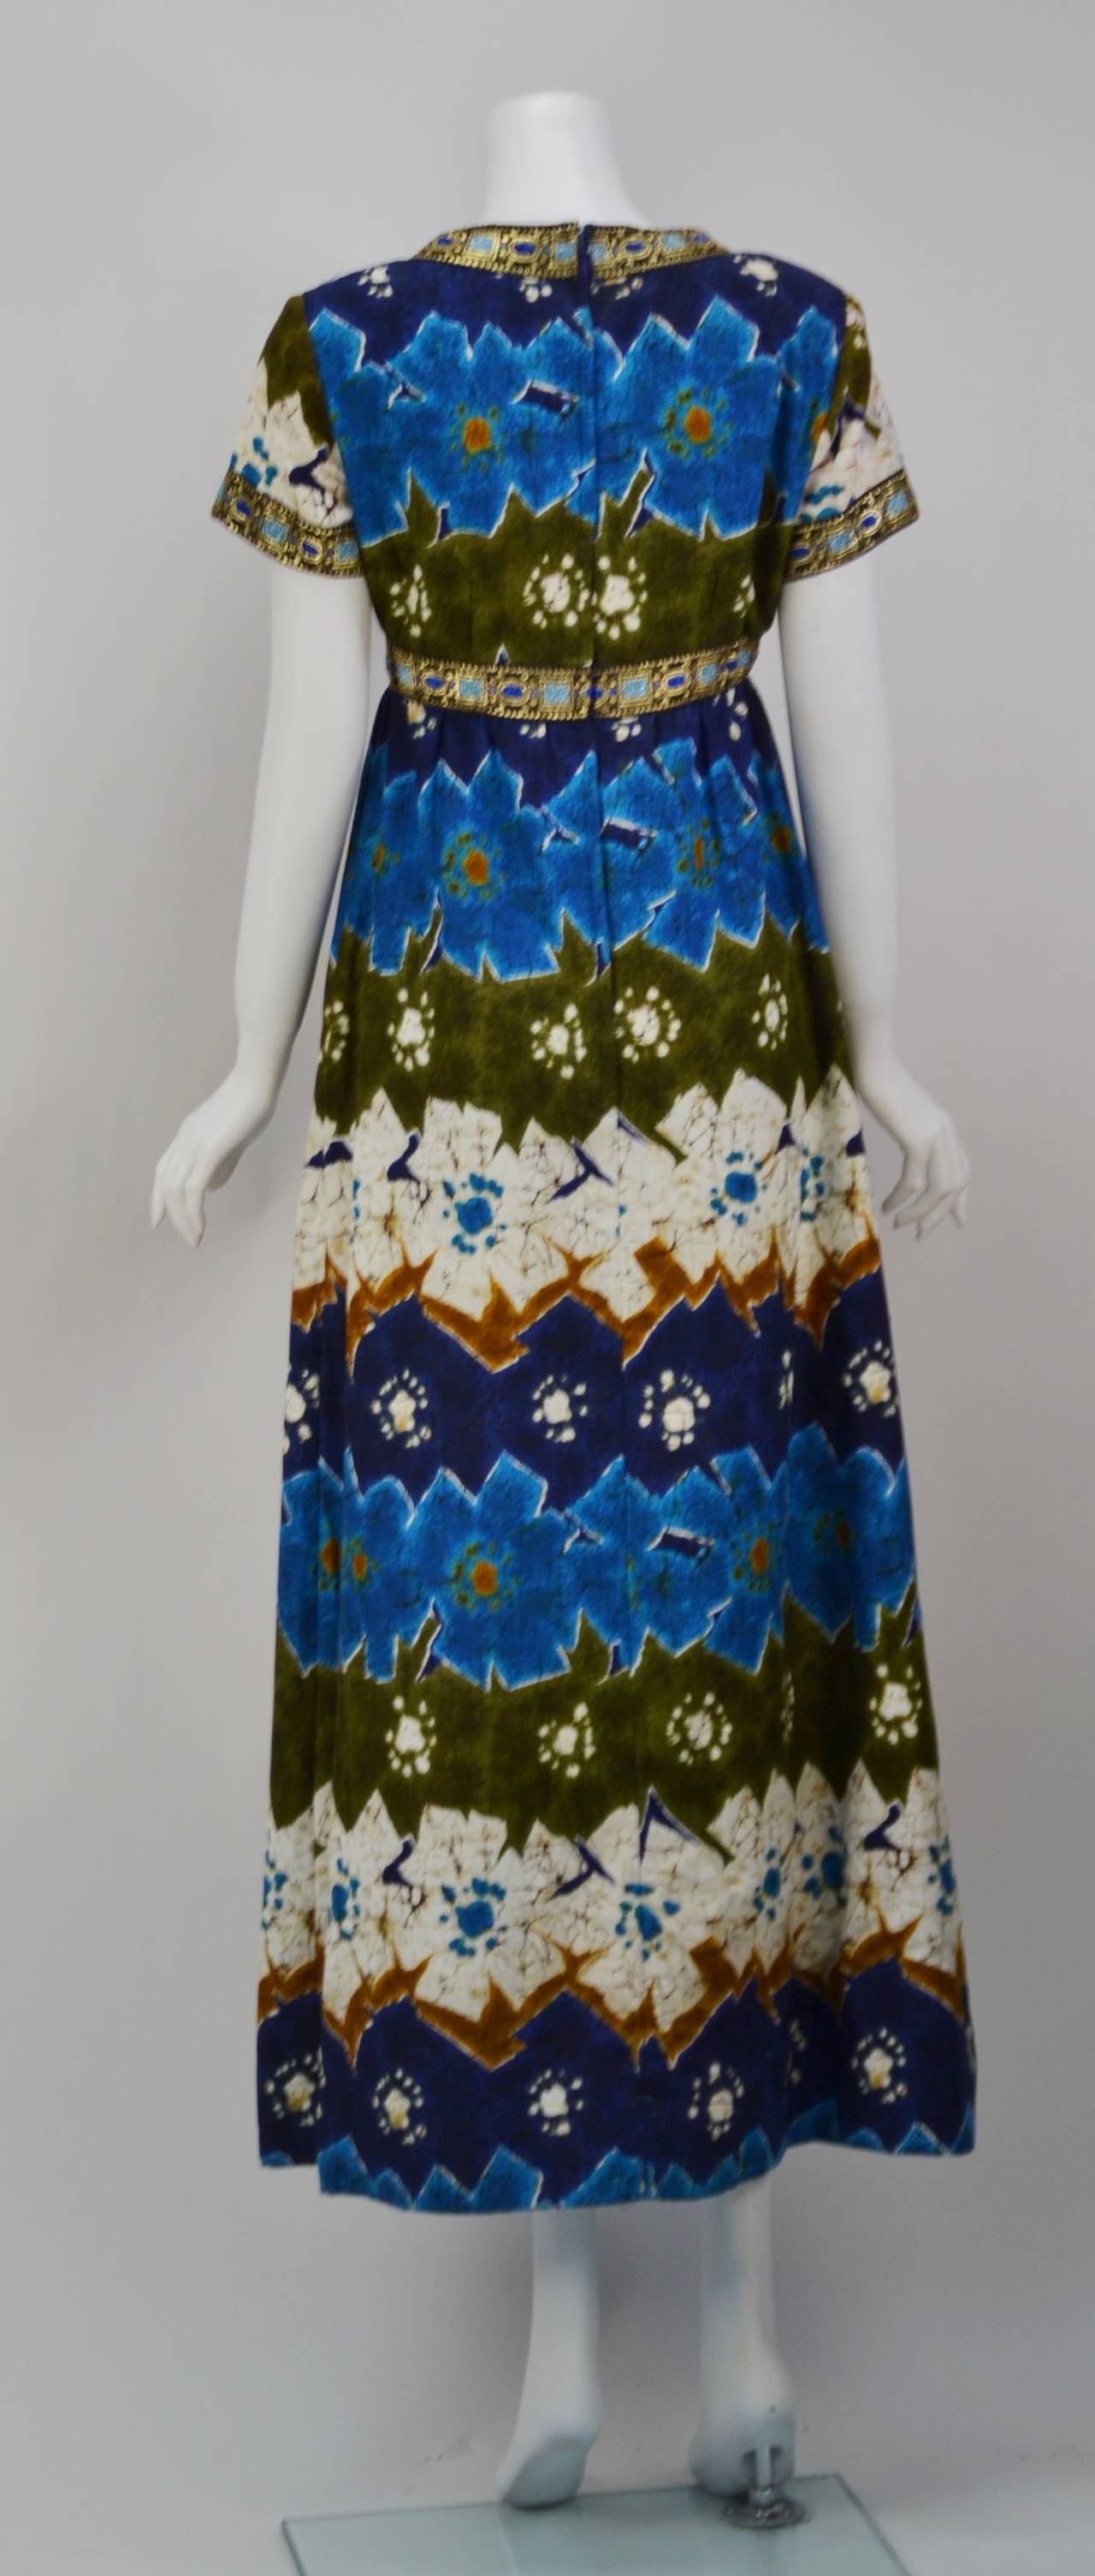  Everyone needs a piece of fun and comfortable resort wear whether you make it to the beach or just need to channel that beach vibe. 

This uber chic cotton gown with its ethnic print is just the trick! The vibrant blue "pops" against the